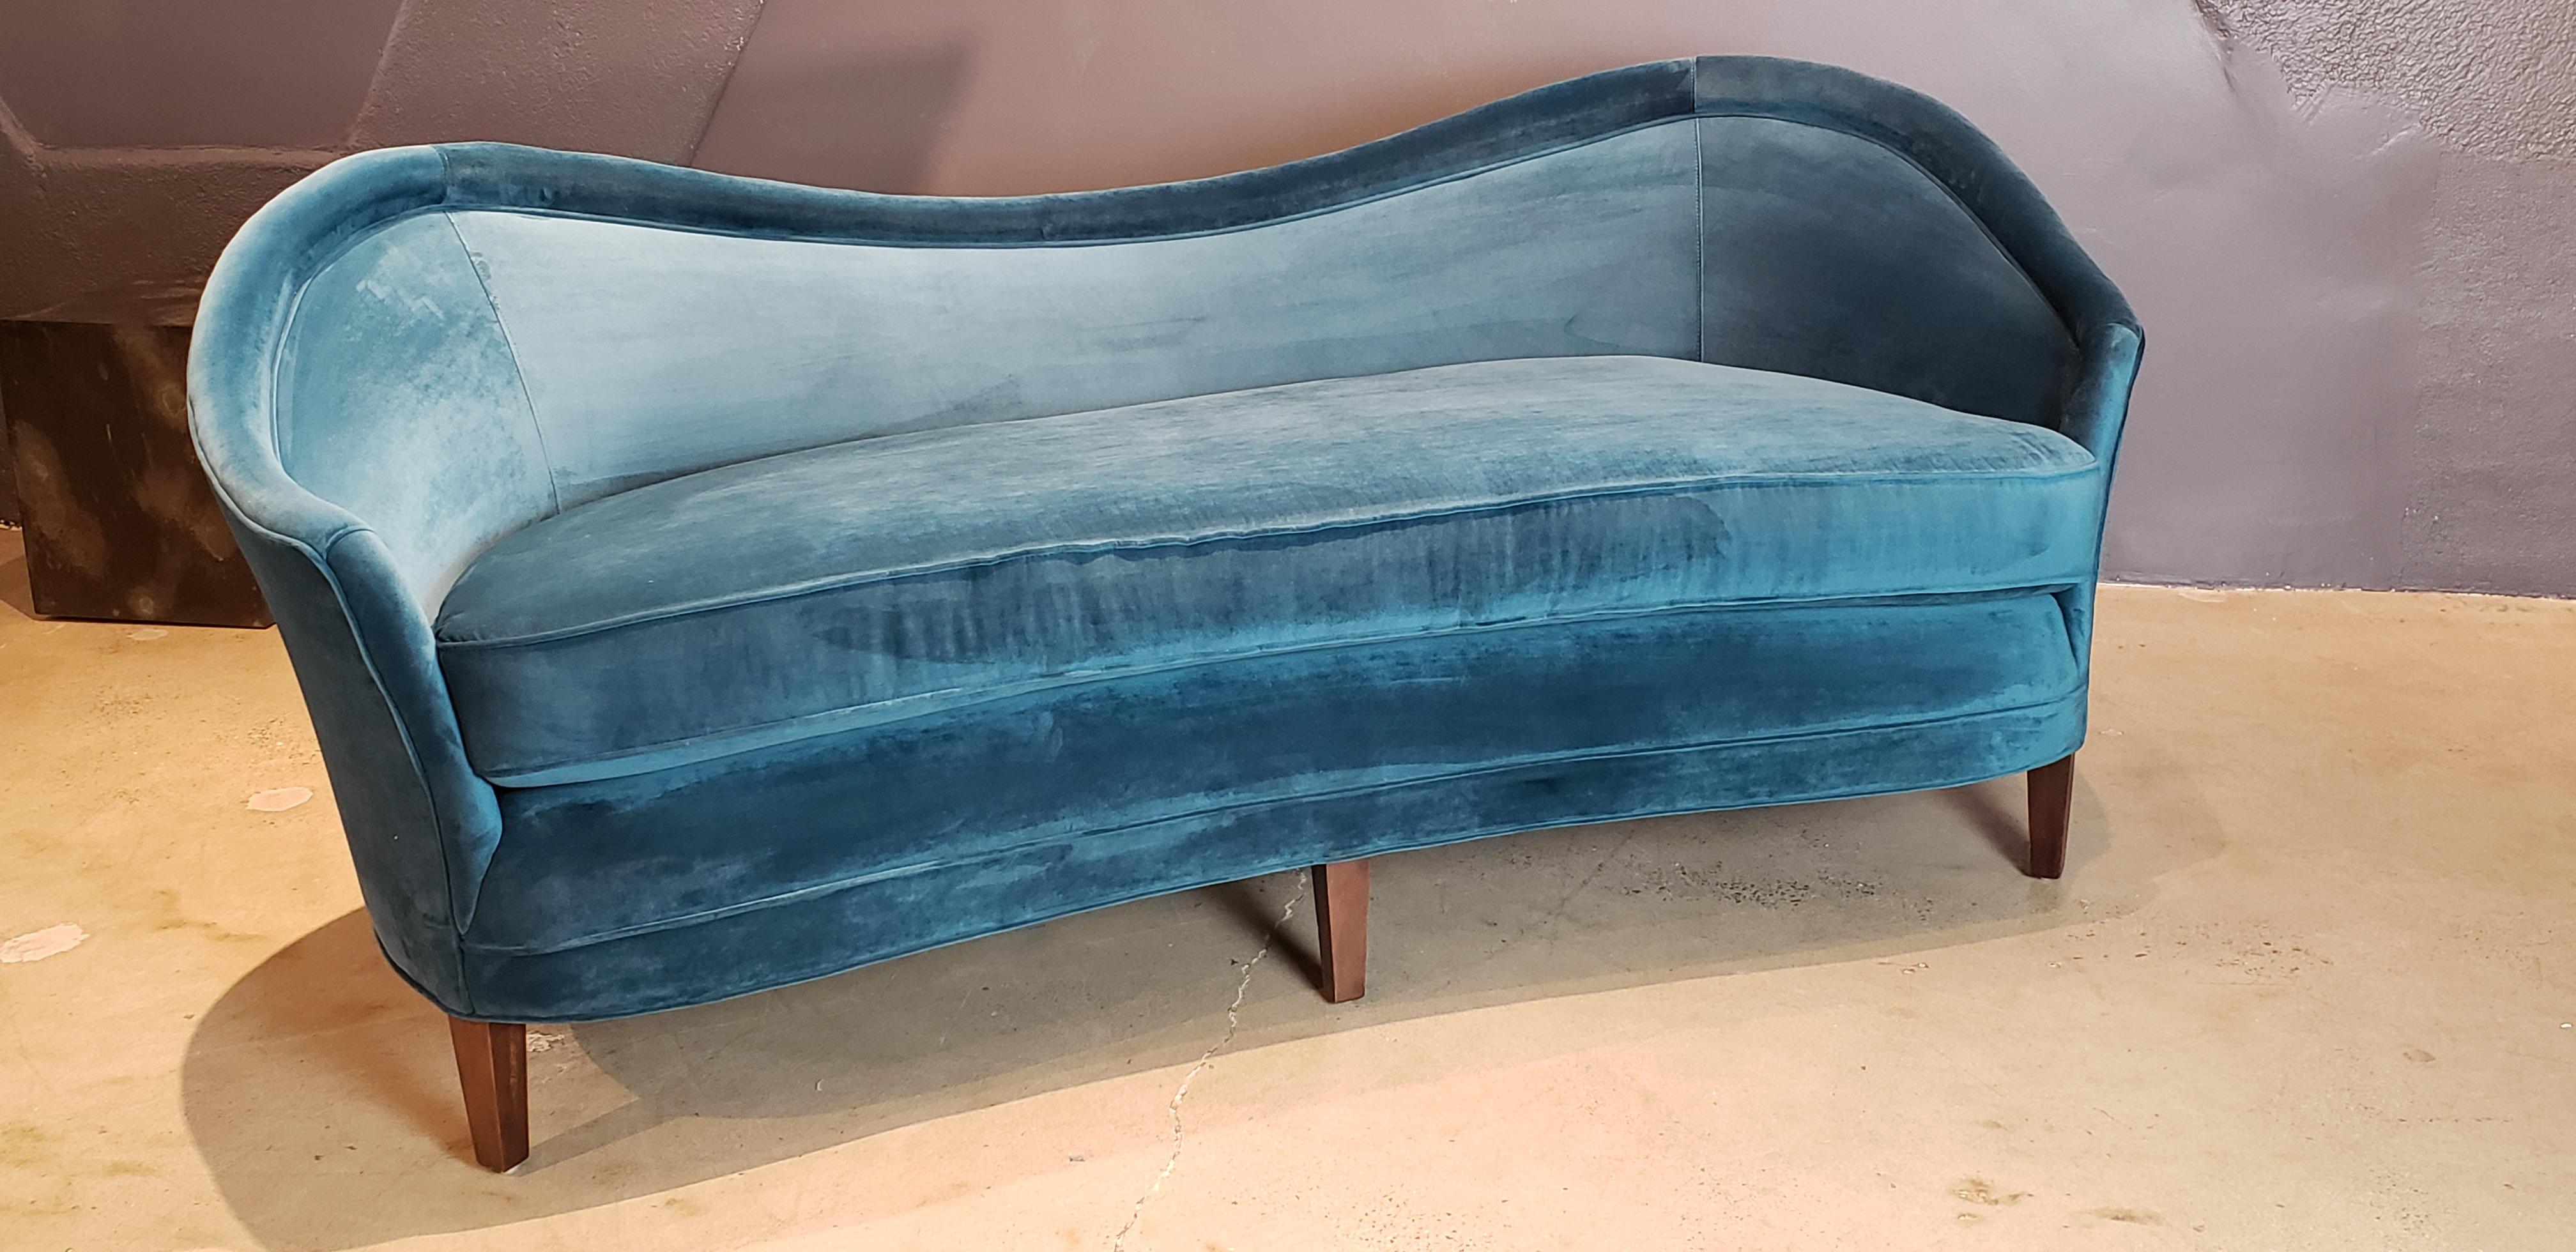 Mid-Century Modern Curved Sofa in the Style of Gio Ponti, Italy, 1940s, Restored in Teal Velvet